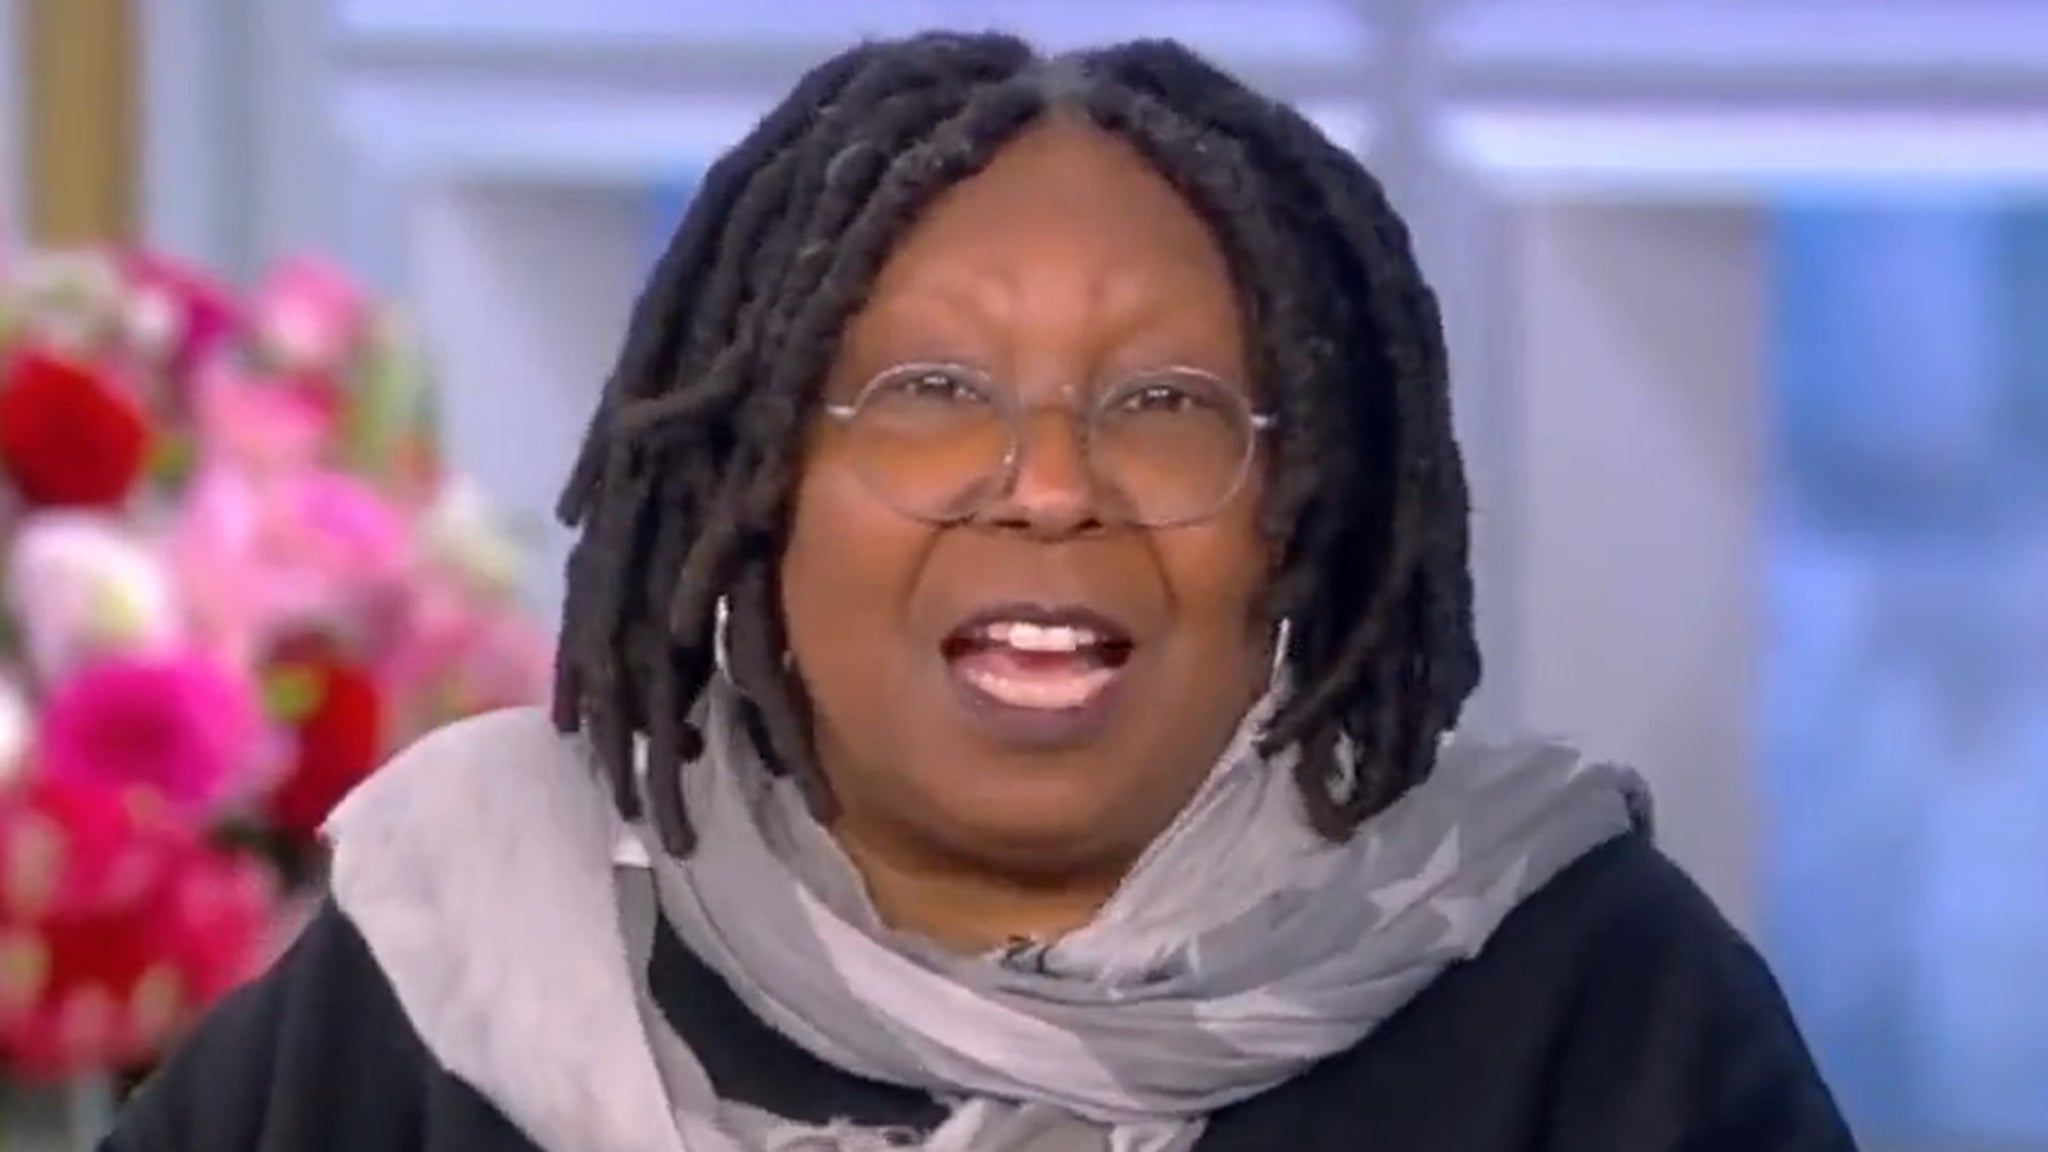 Whoopi Goldberg Returns to 'The View' After 2-Week Suspension